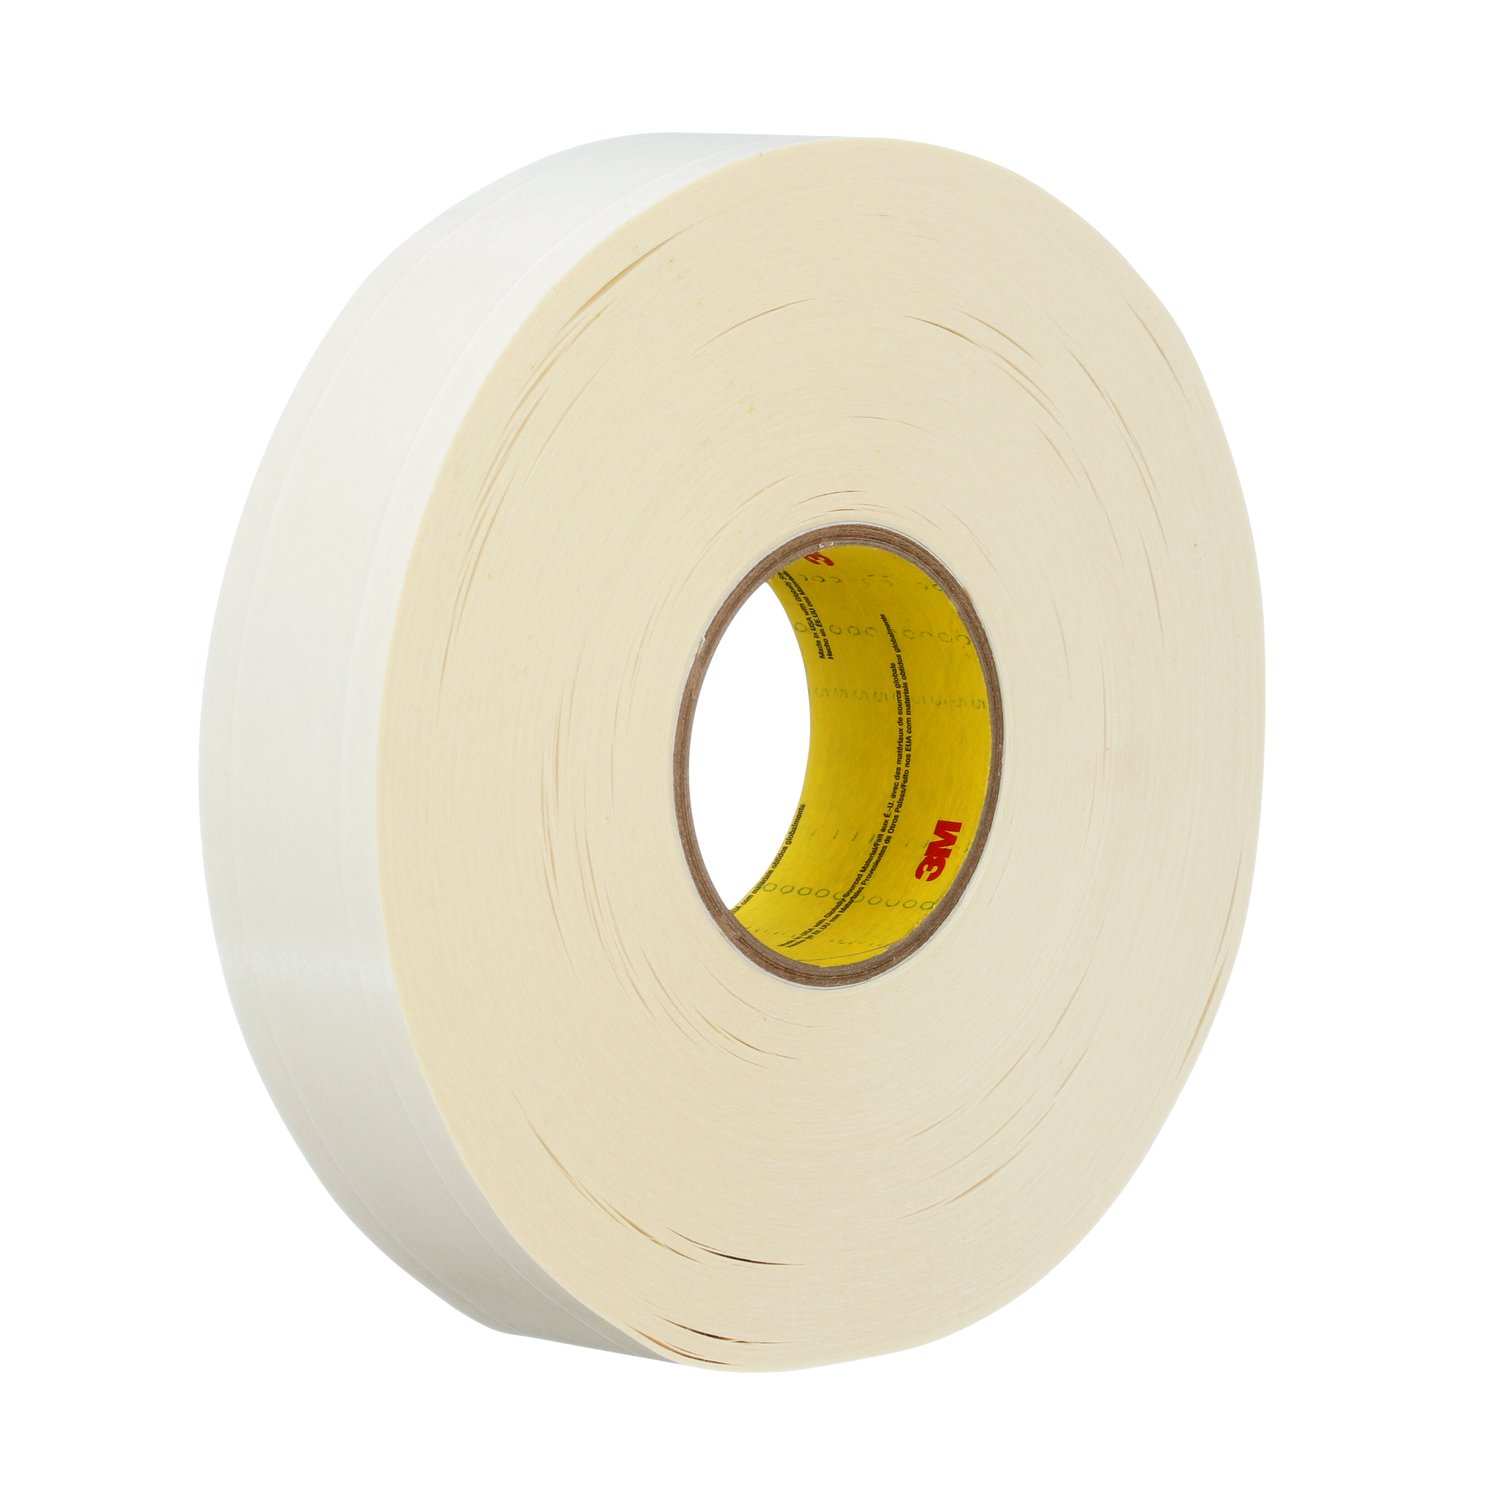 7100028177 - 3M Repulpable Heavy Duty Double Coated Tape R3287, White, 72 mm x 55 m,
5 mil, 12 rolls per case